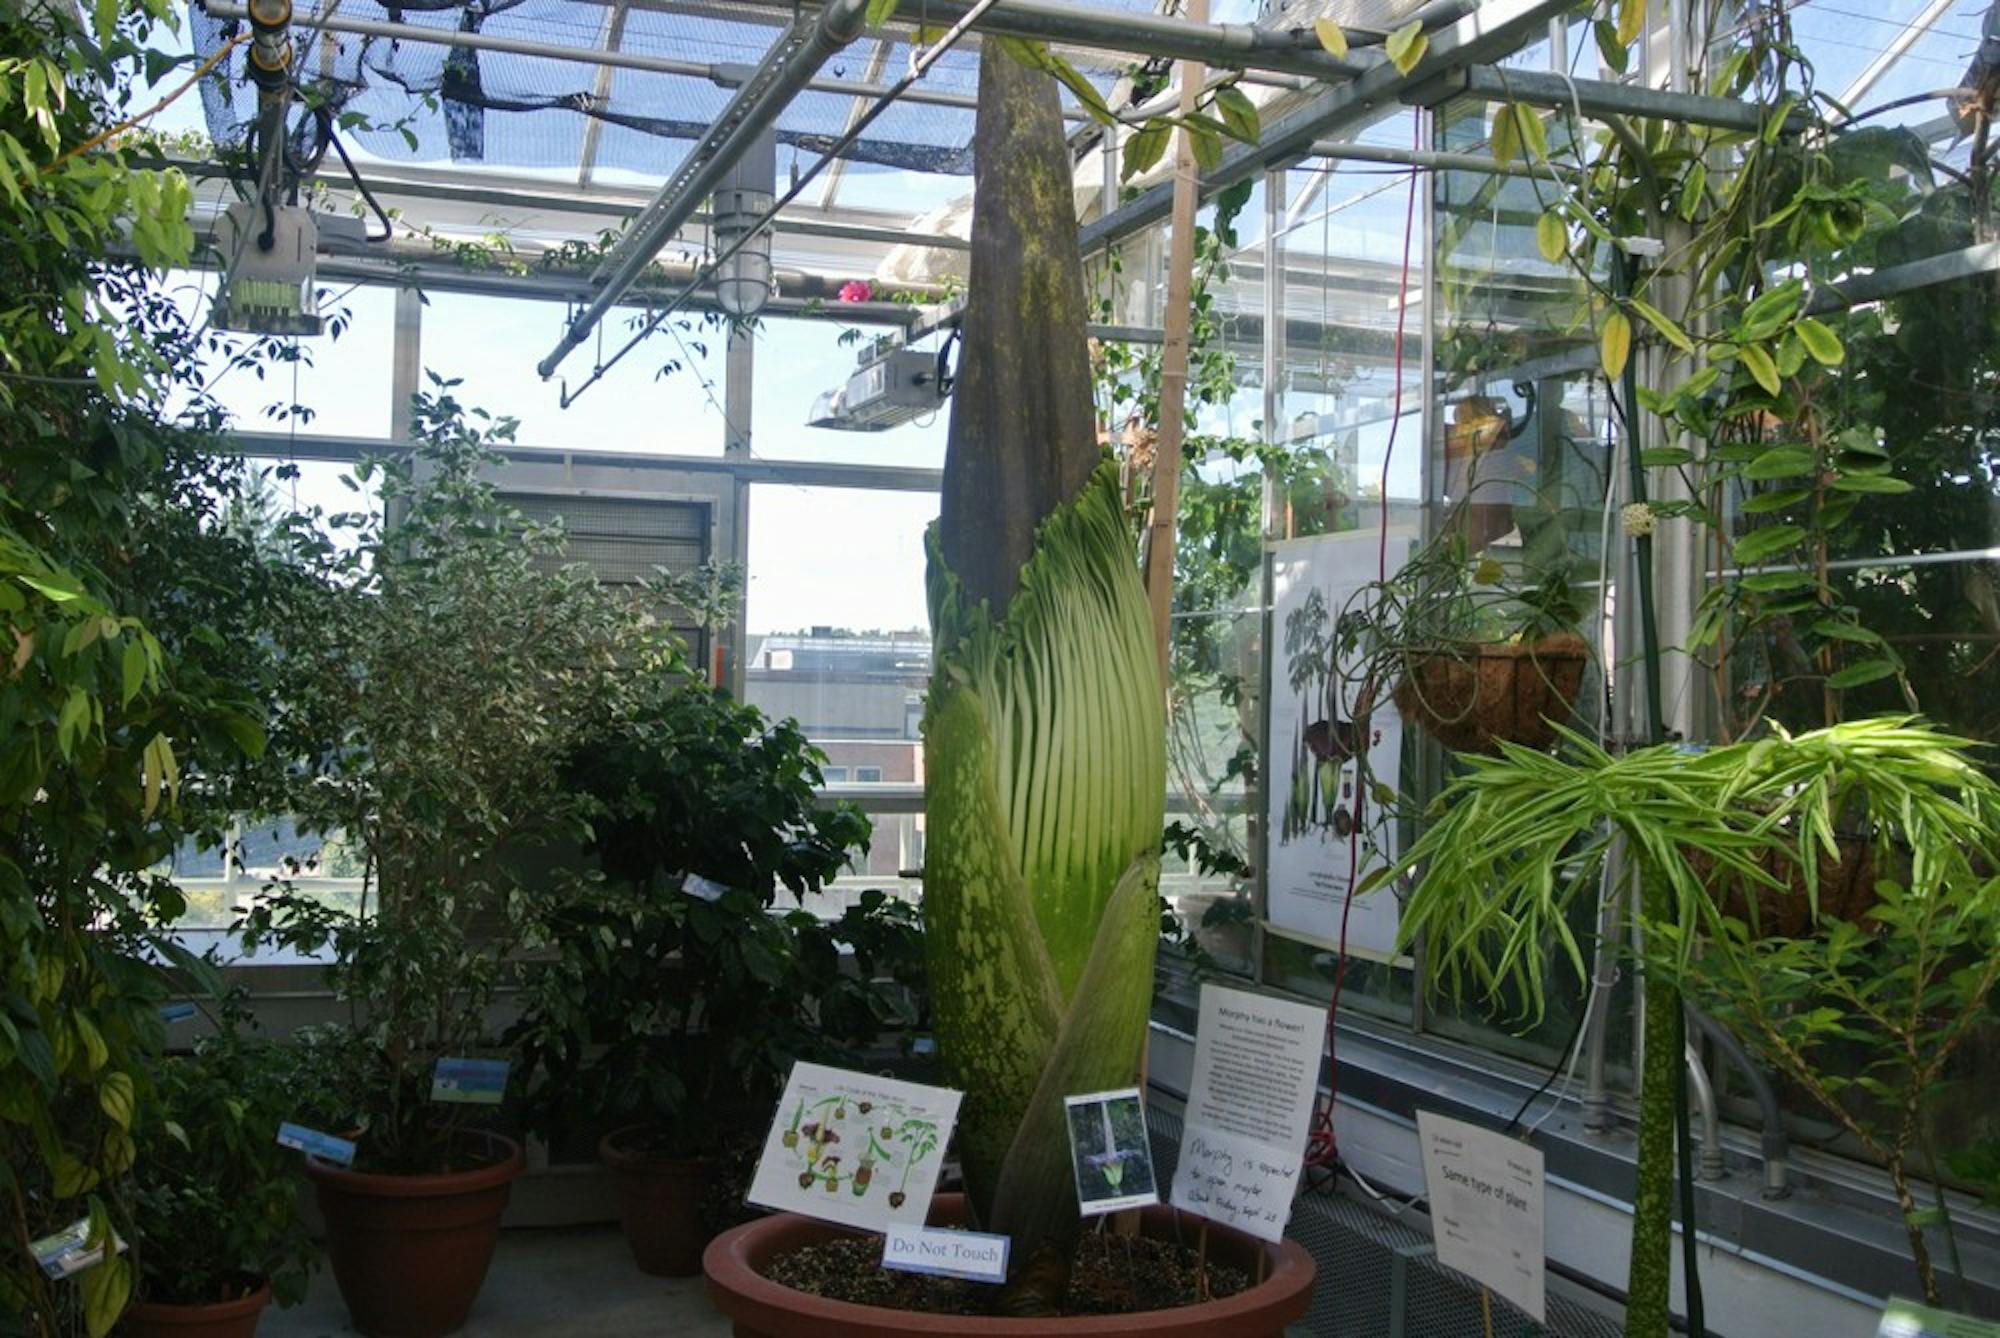 The corpse flower, which only blooms every six years, is supposed to bloom in the Life Sciences Greenhouse sometime soon.